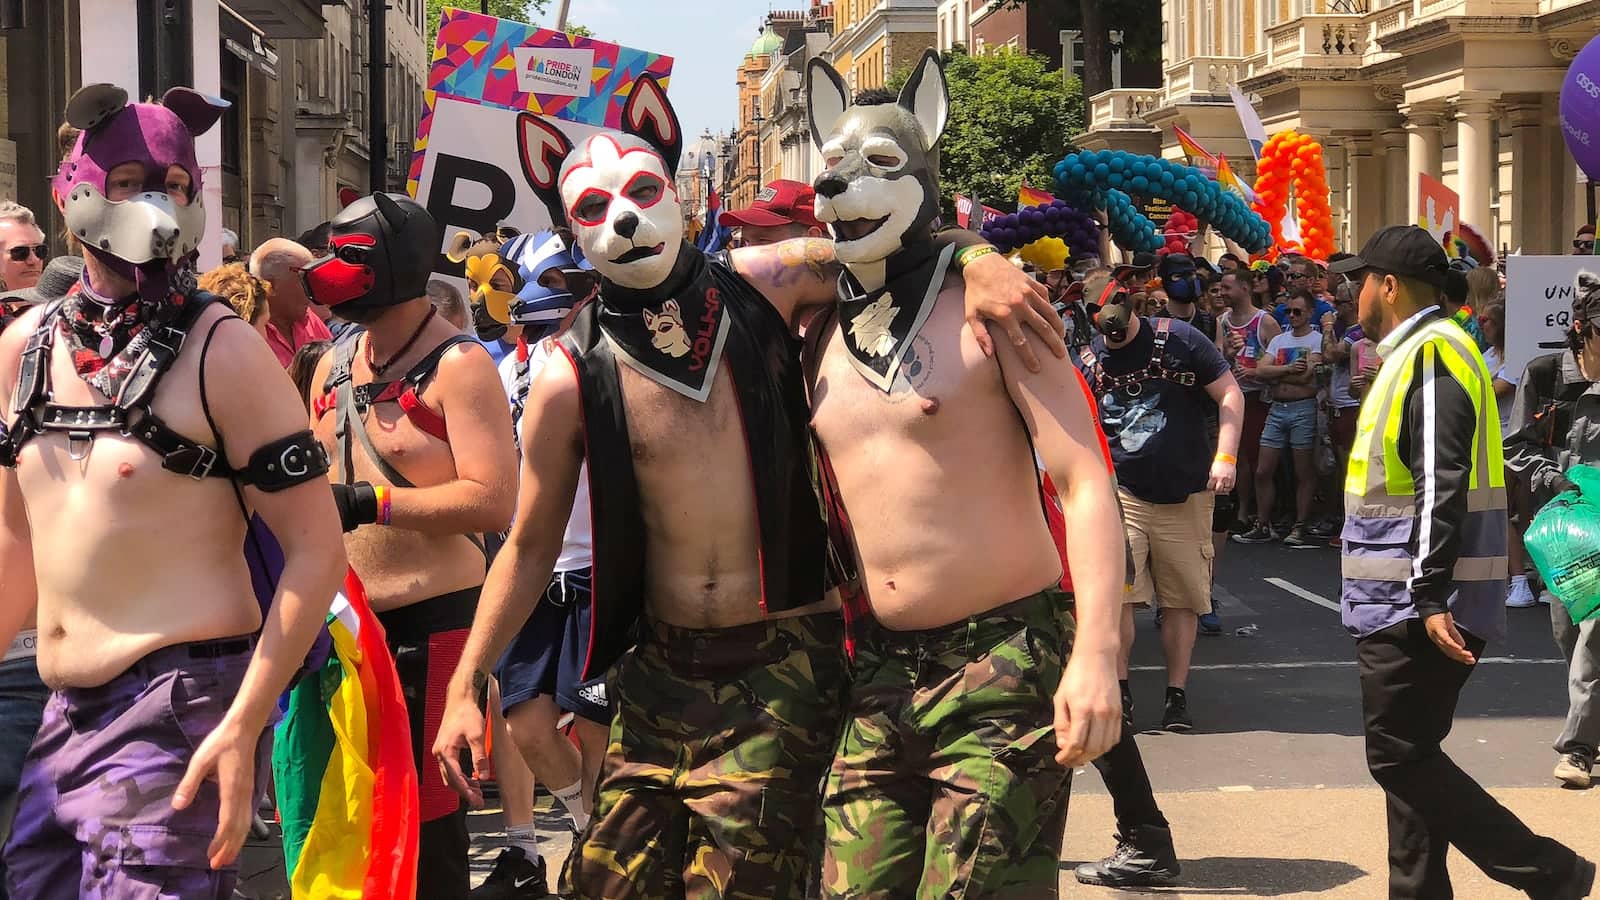 Pup fetish one of best Pride outfits